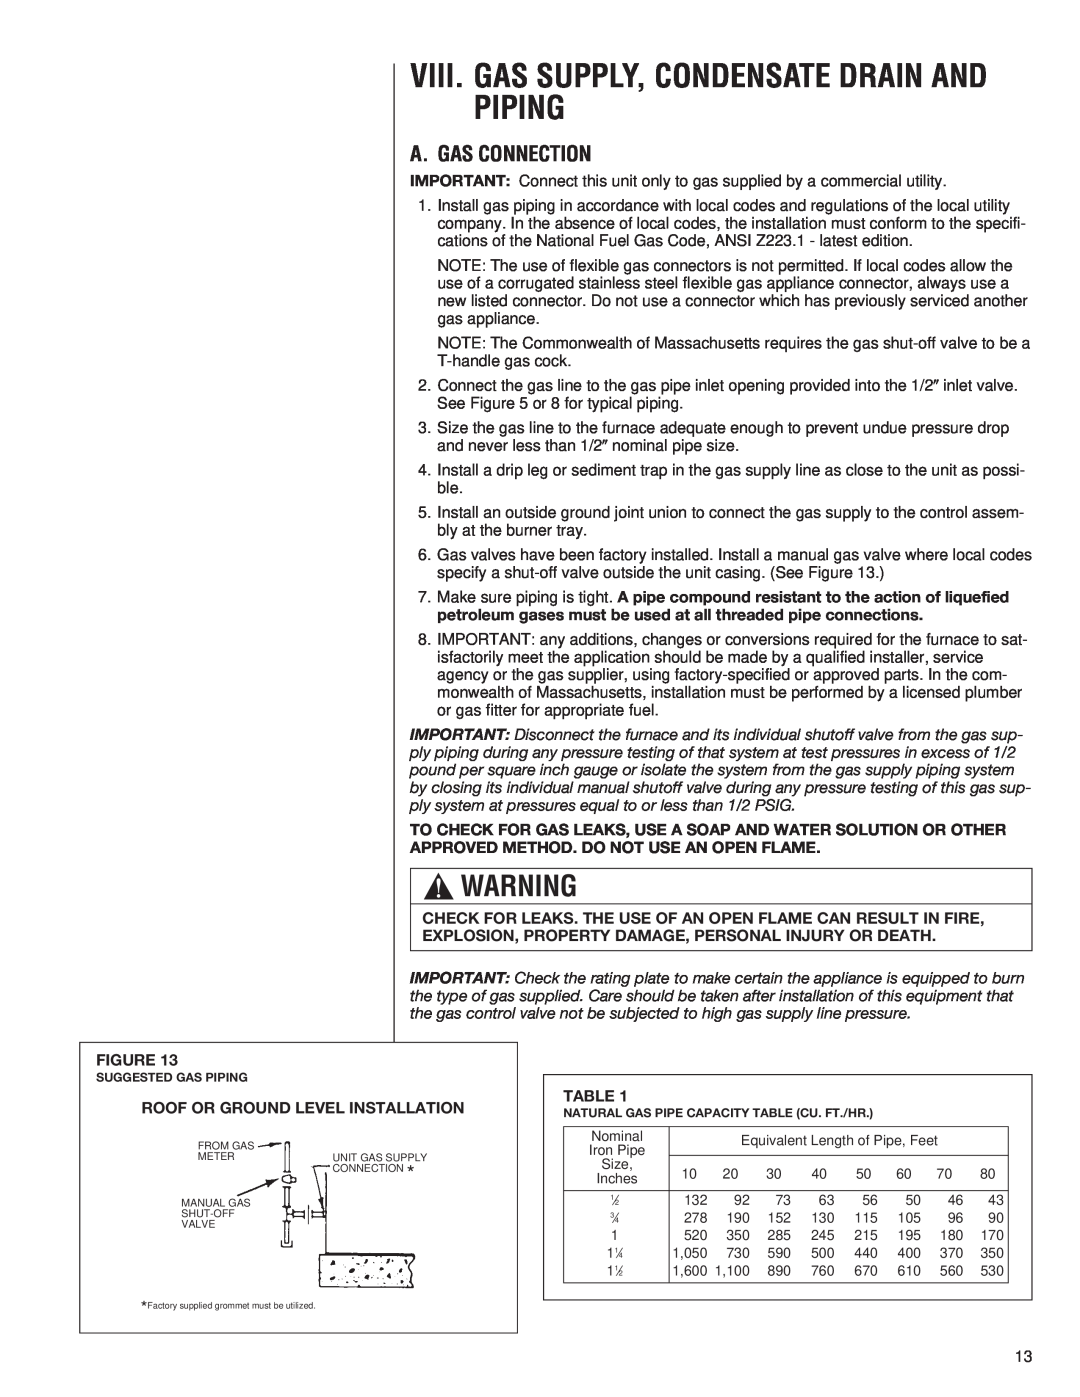 Heat Controller A-13 installation instructions Viii. Gas Supply, Condensate Drain And Piping, A. Gas Connection 